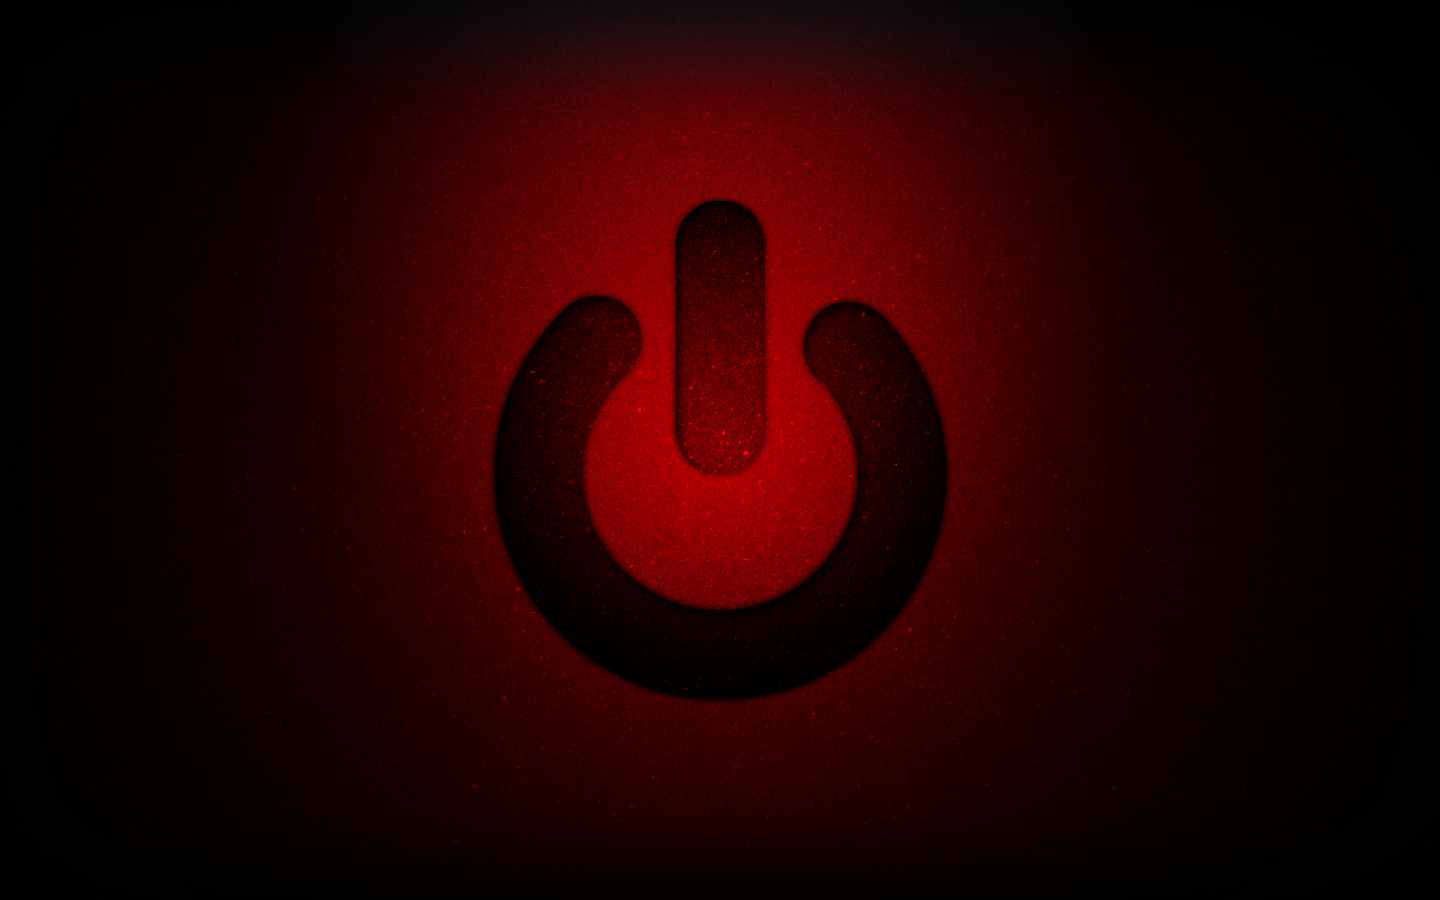 red power off wallpapers